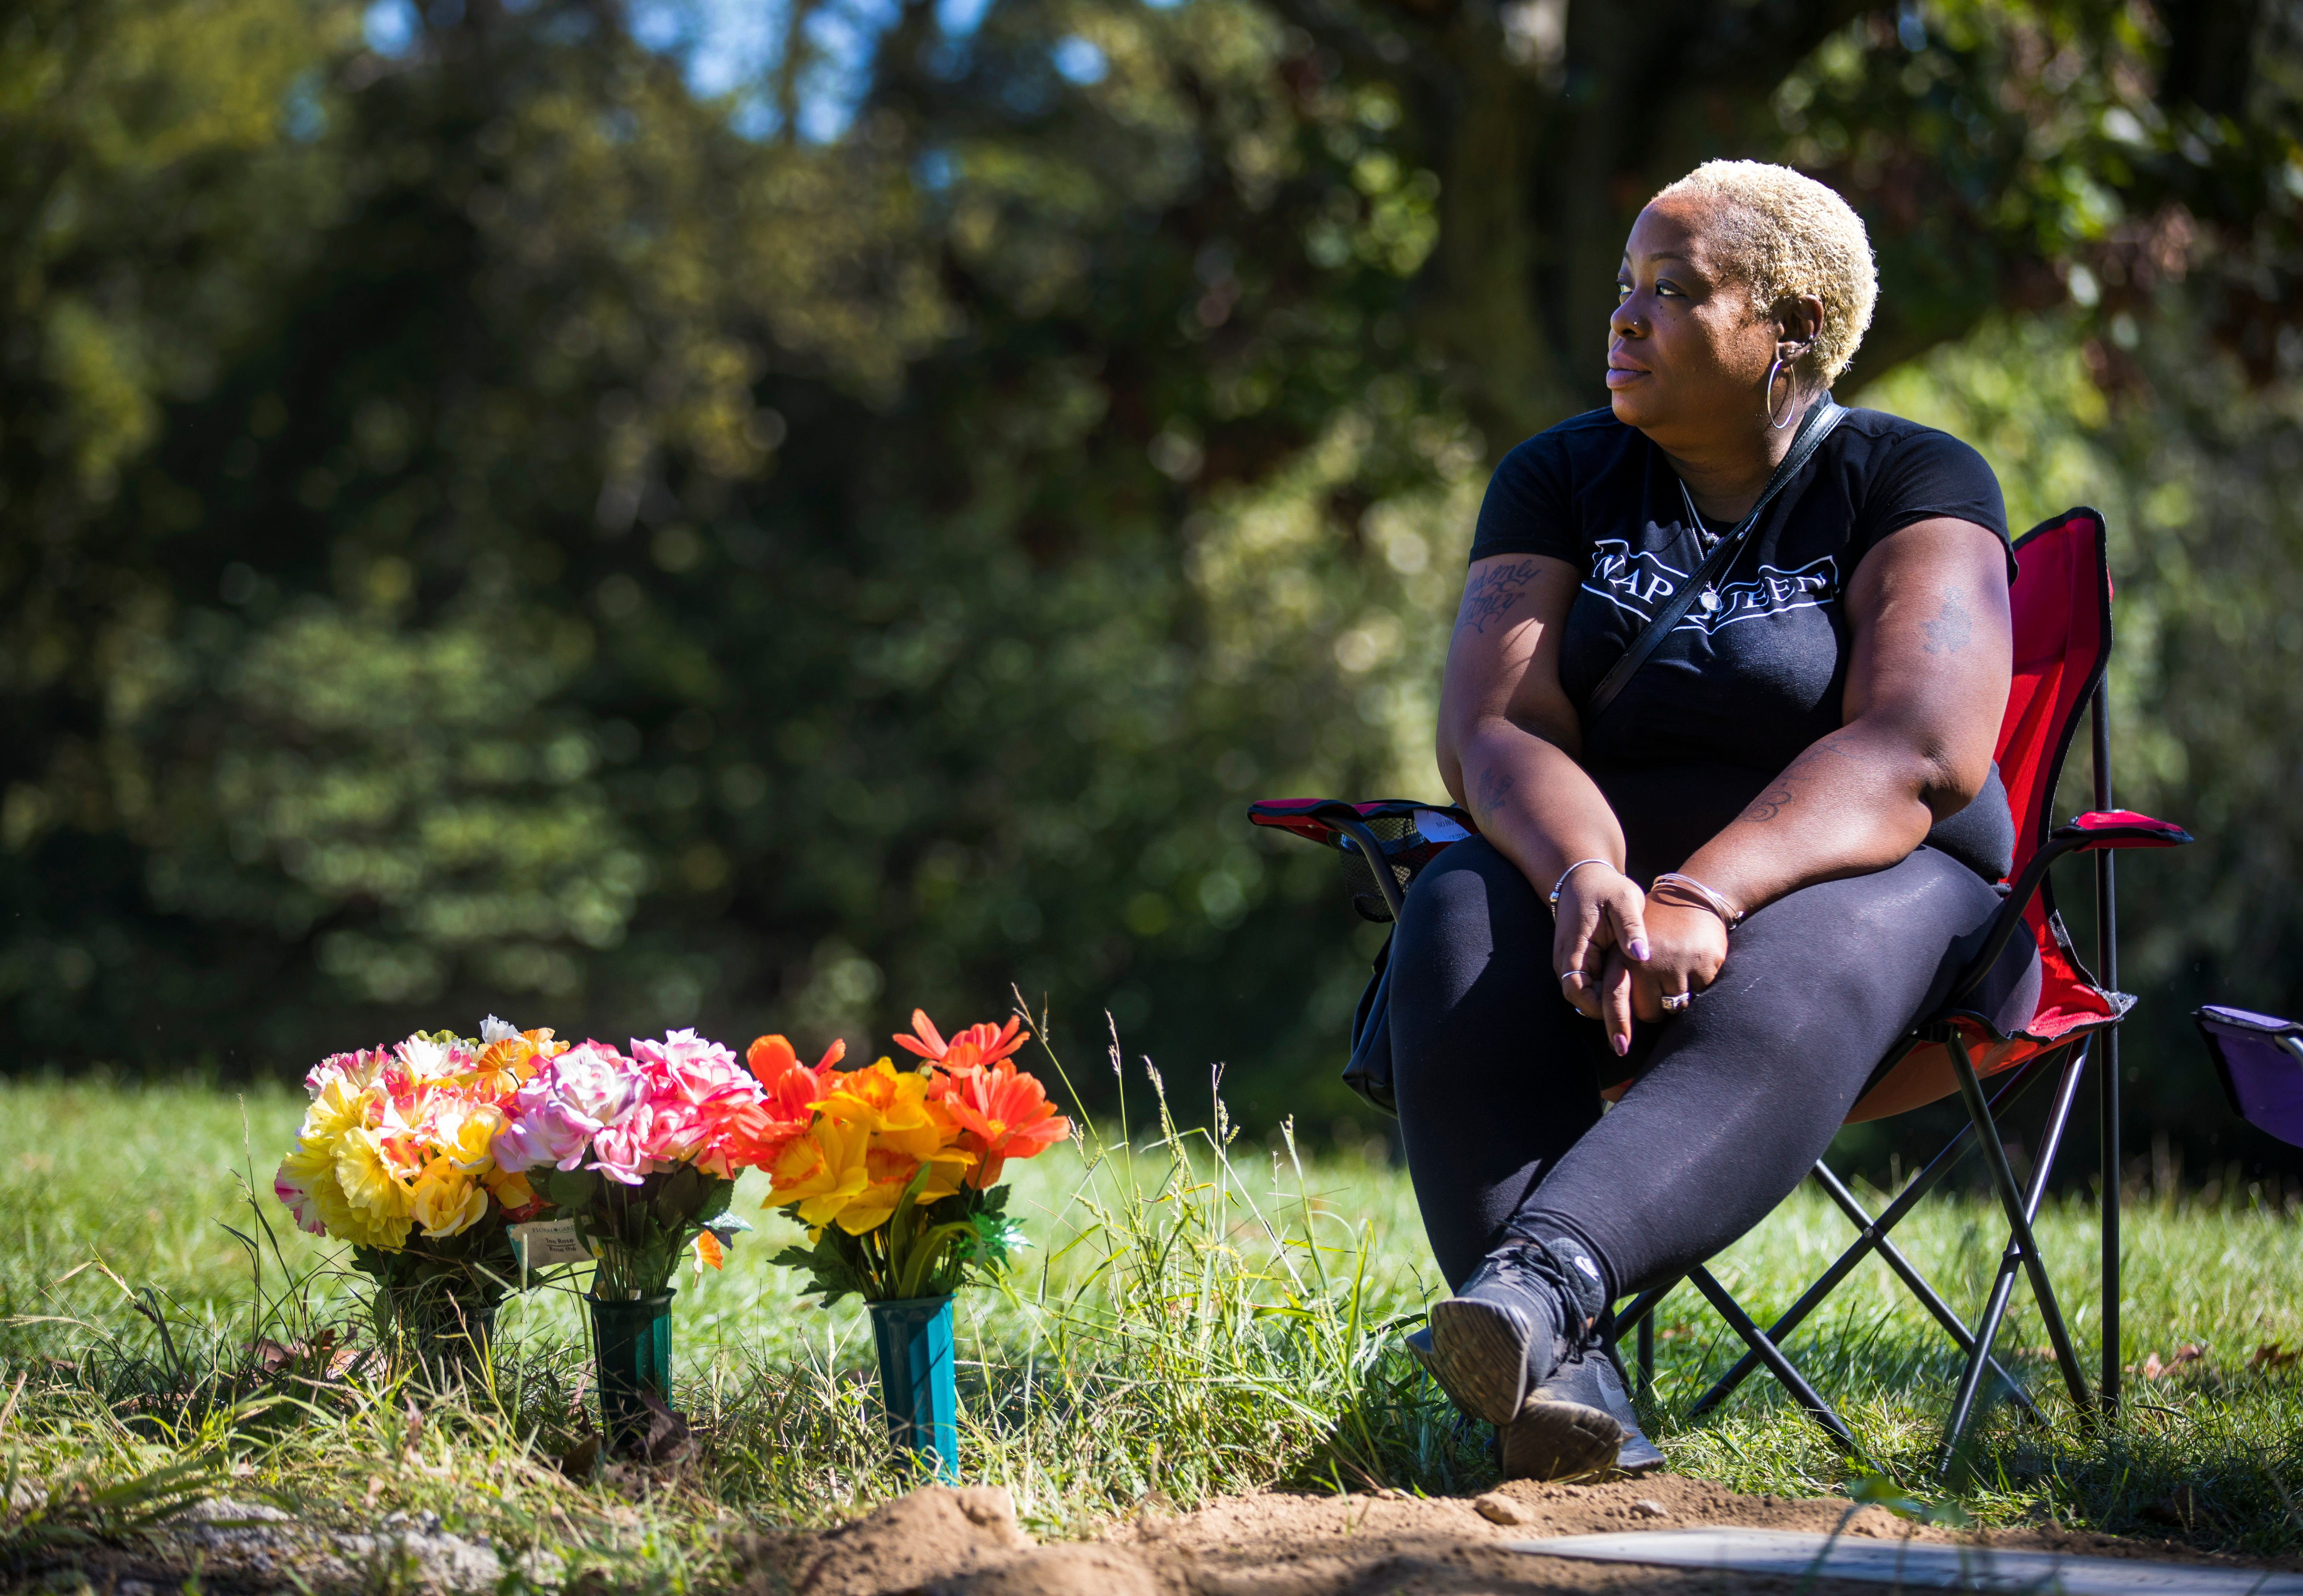 Tracey Jones visits her daughter's grave, Sept. 26, 2021. Patricia Woods, 24, was killed April 17, 2020, in what police believe was a domestic violence homicide. "How does a mom get over the death of her daughter? I just don't know how to do it."  Jones now has custody of Woods’ two children.